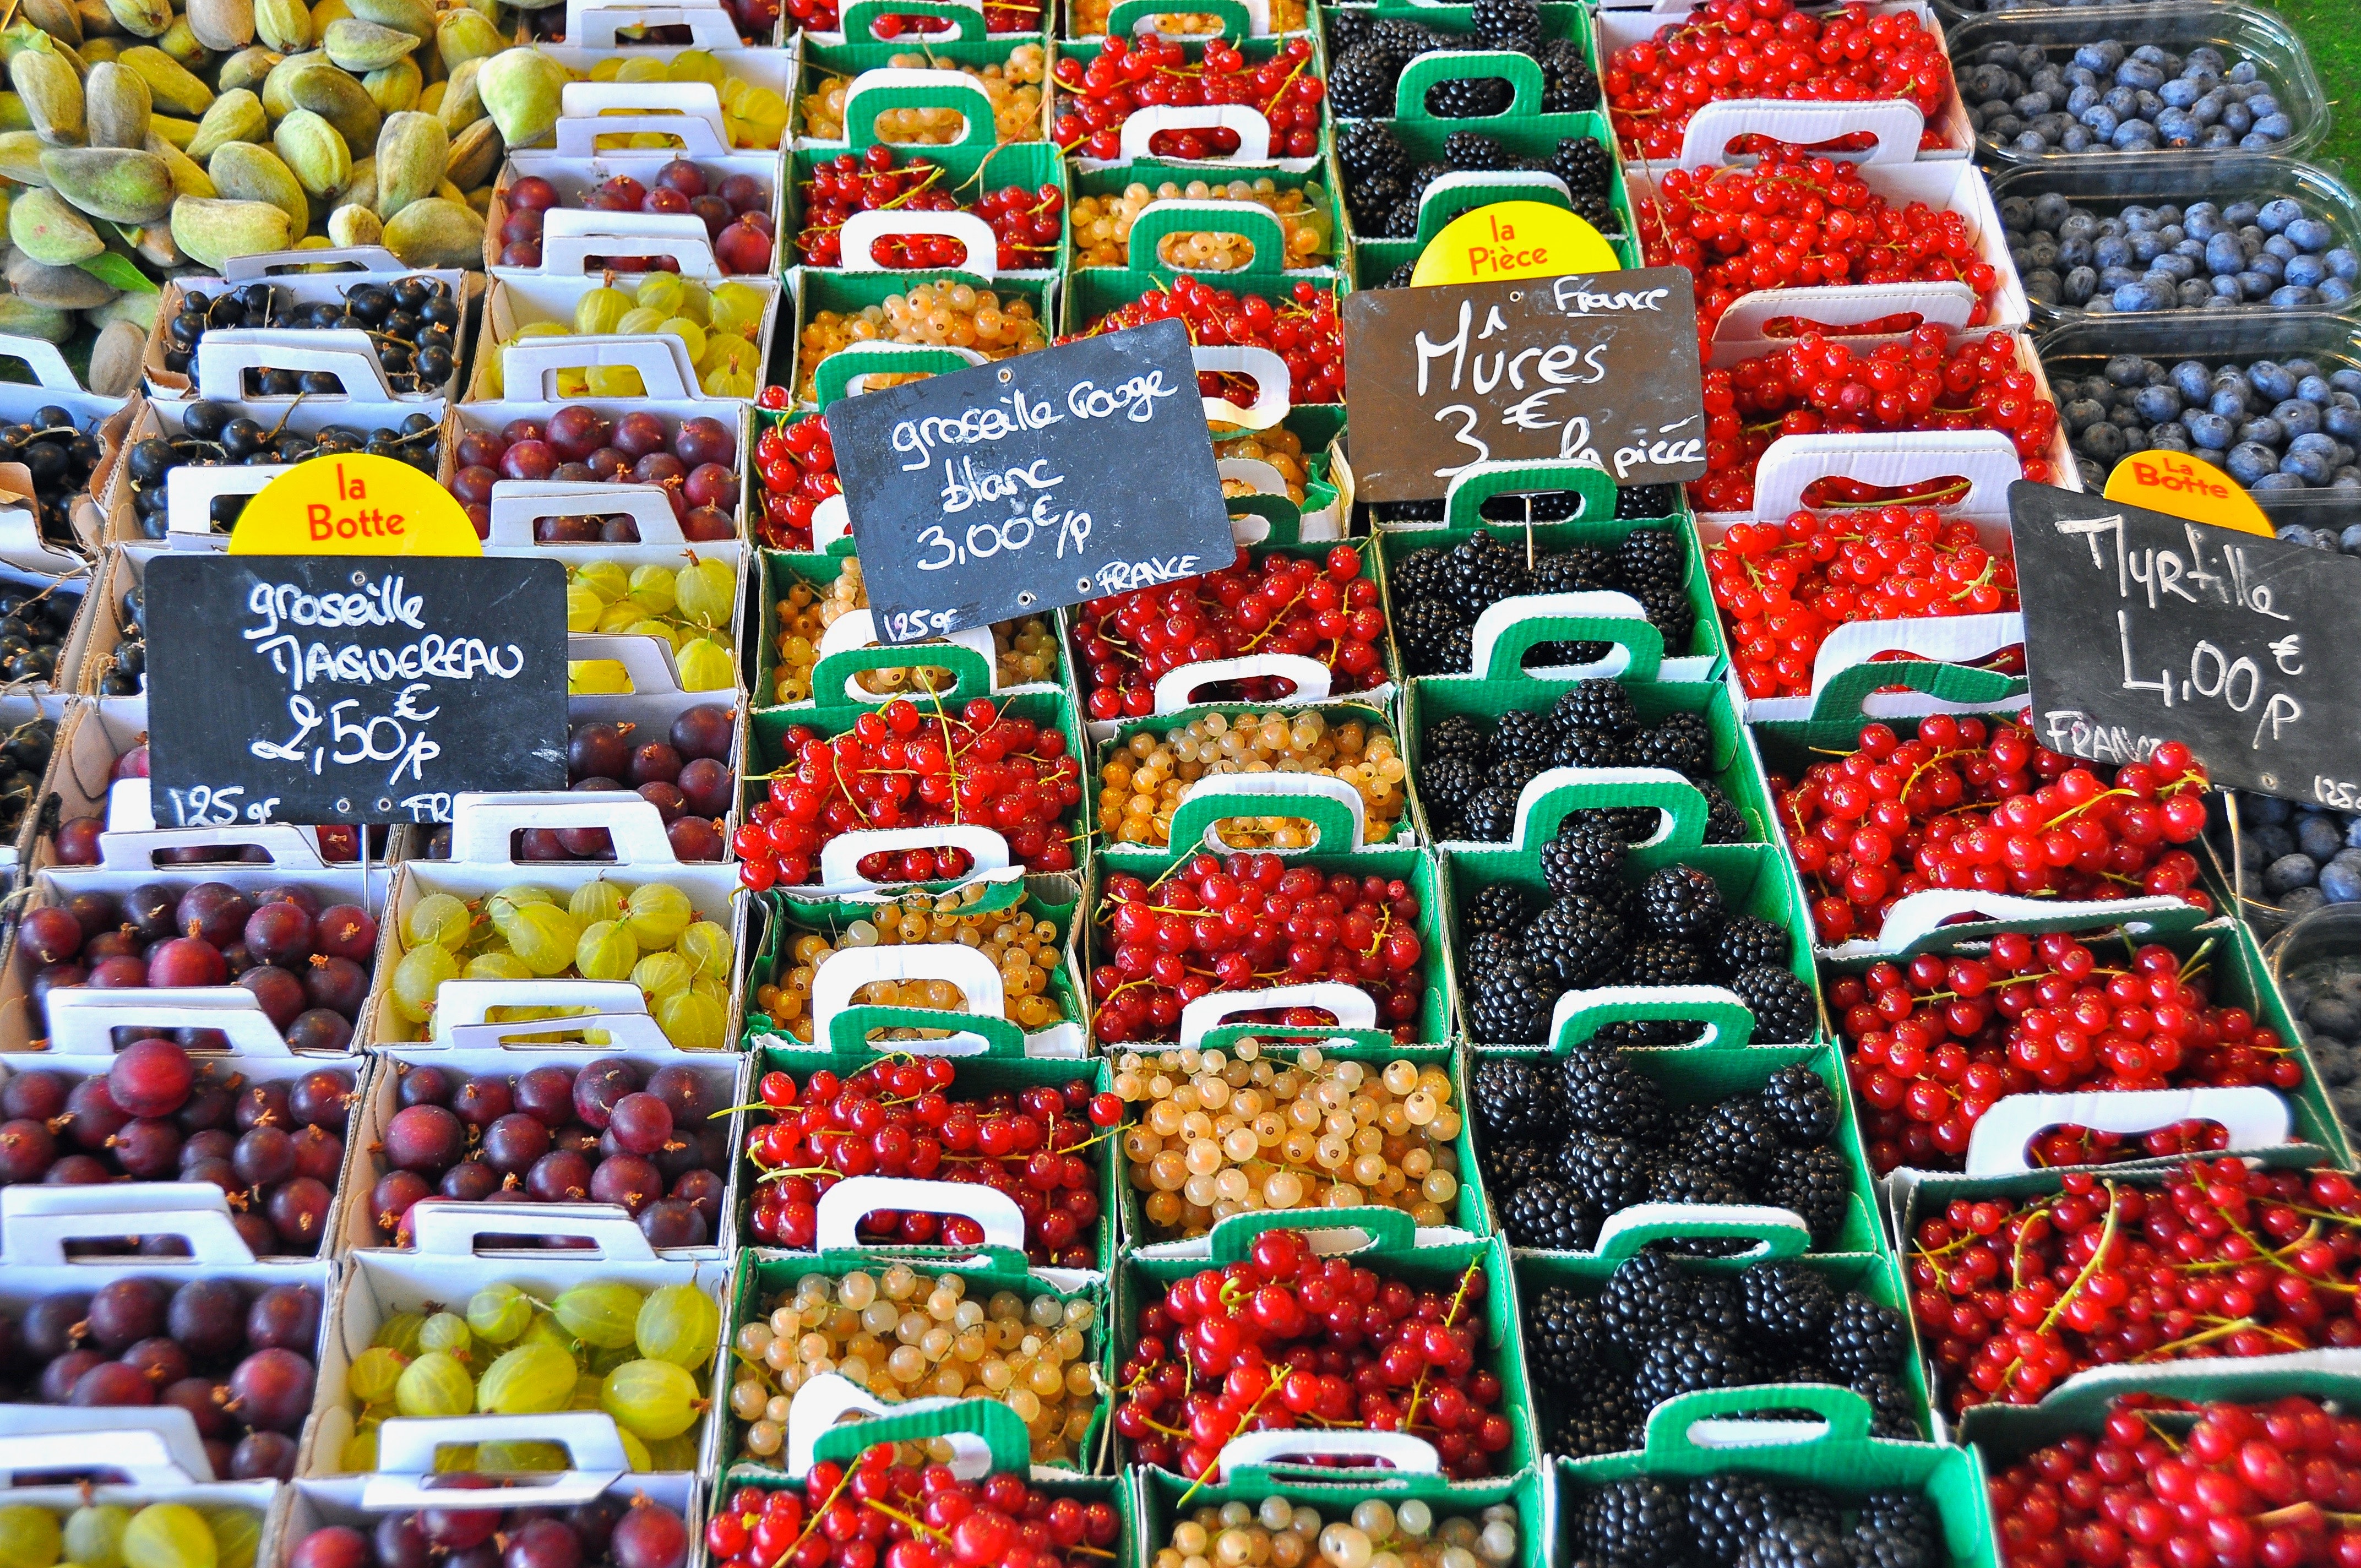 Stack of fruits with signage photo